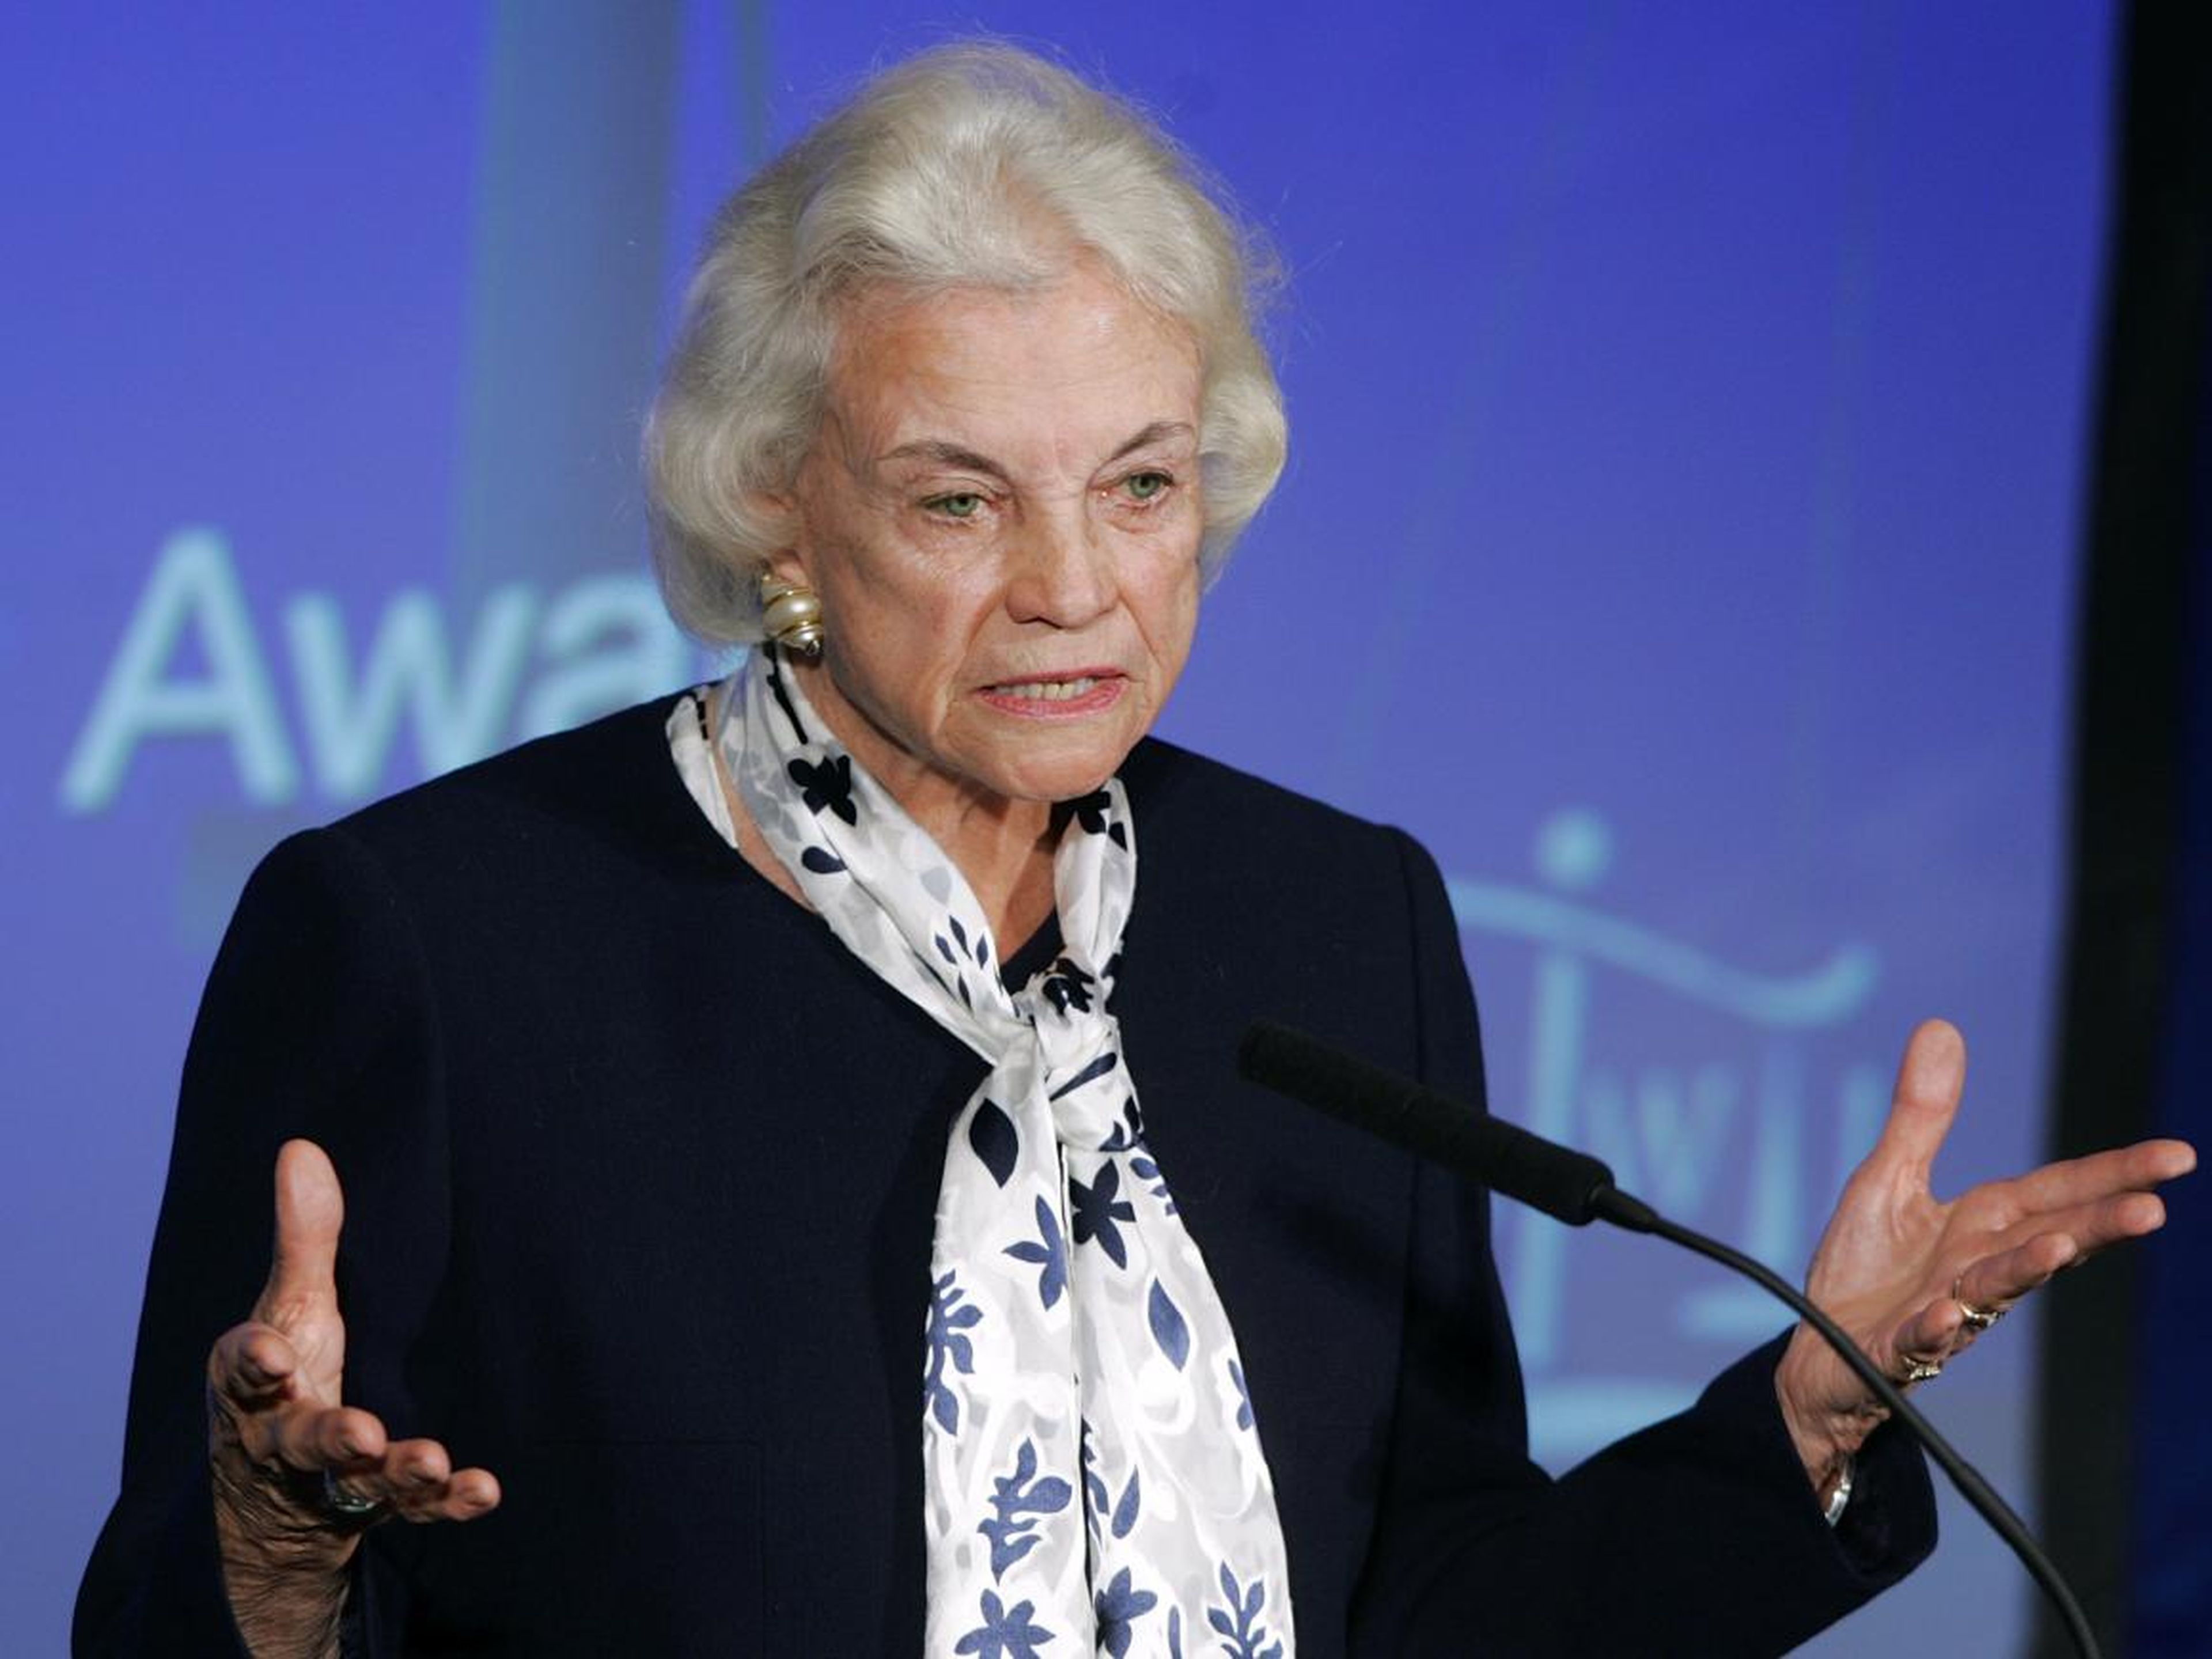 Sandra Day O'Connor was the first woman appointed to the US Supreme Court in 1981.